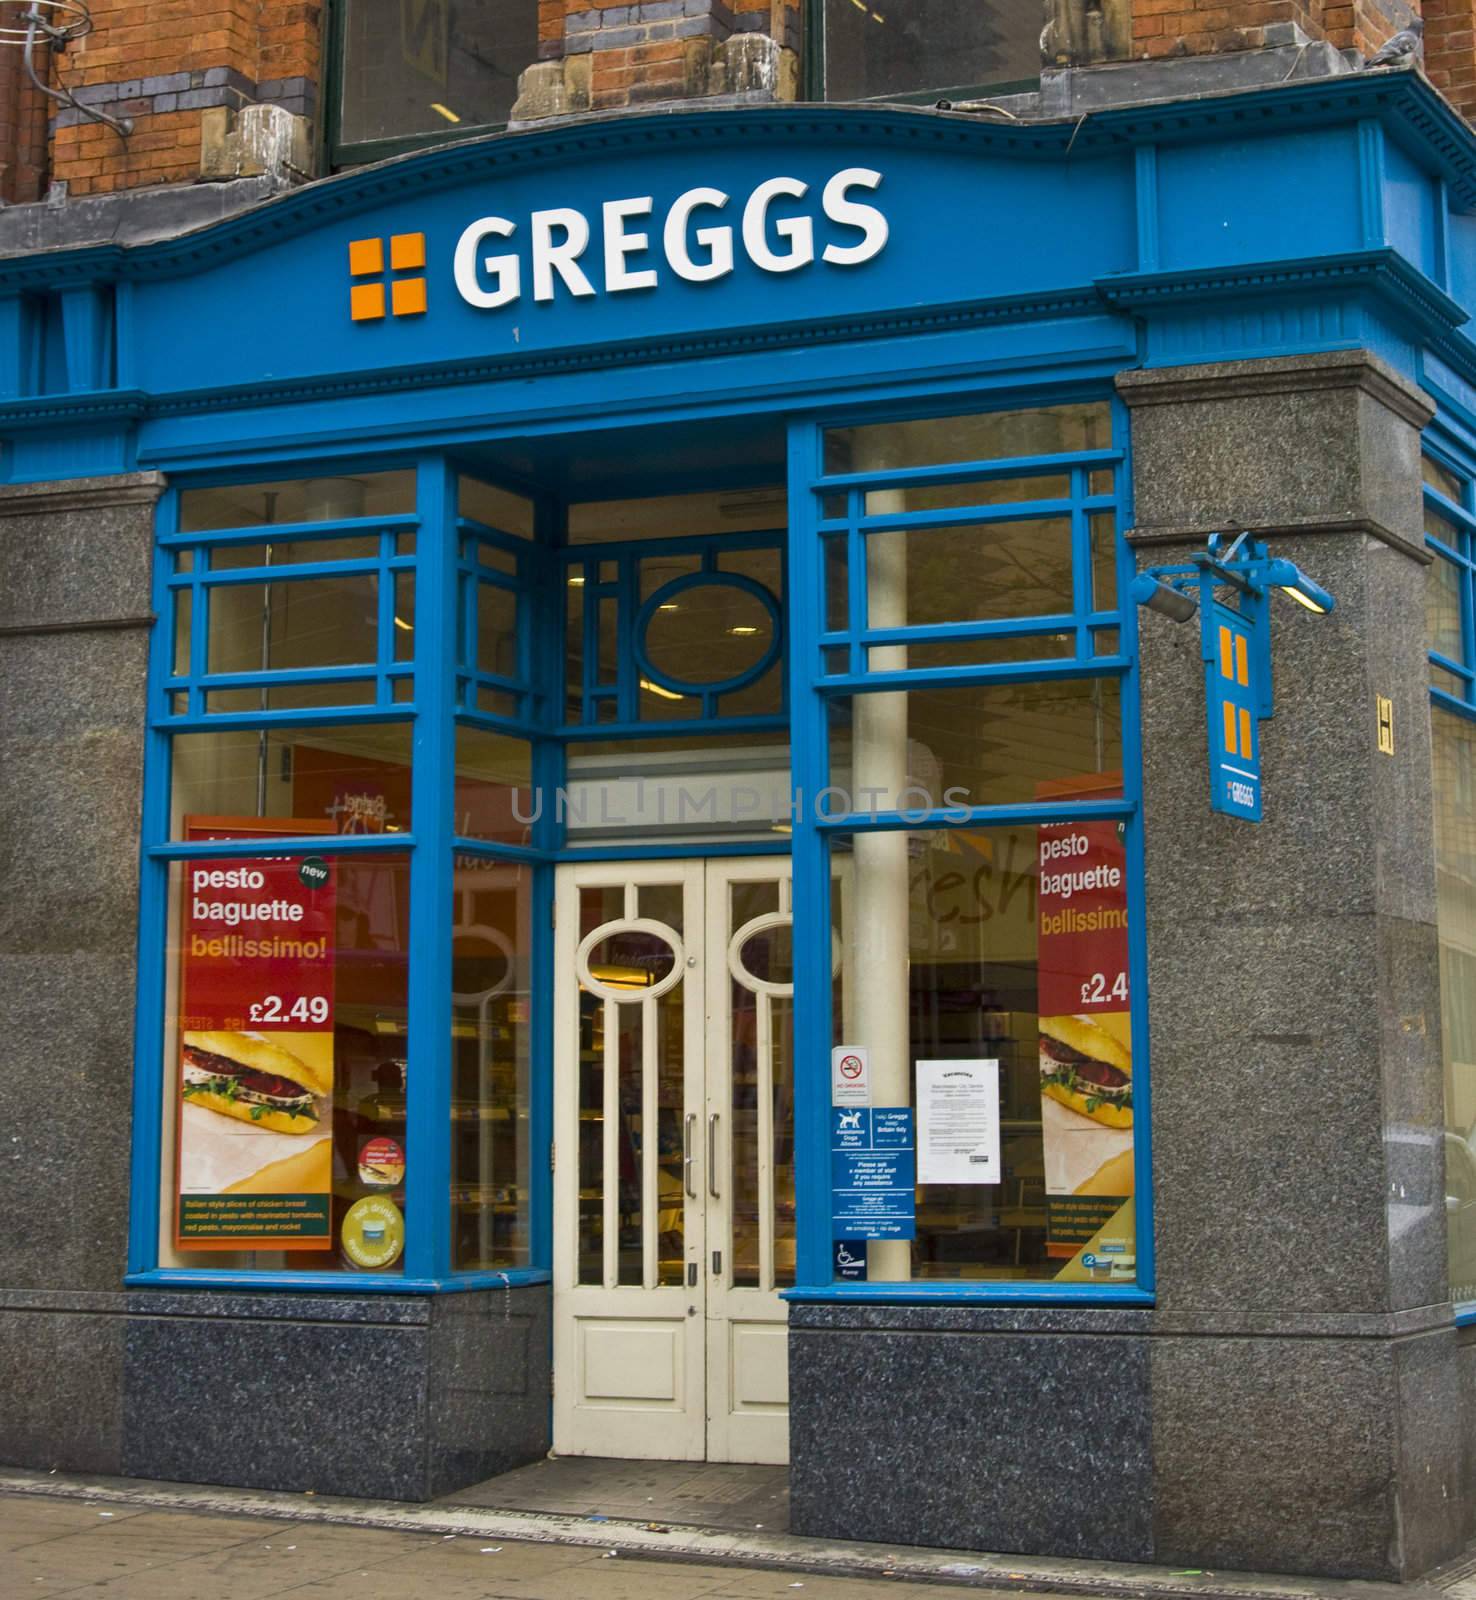 Greggs the baker2 by cvail73